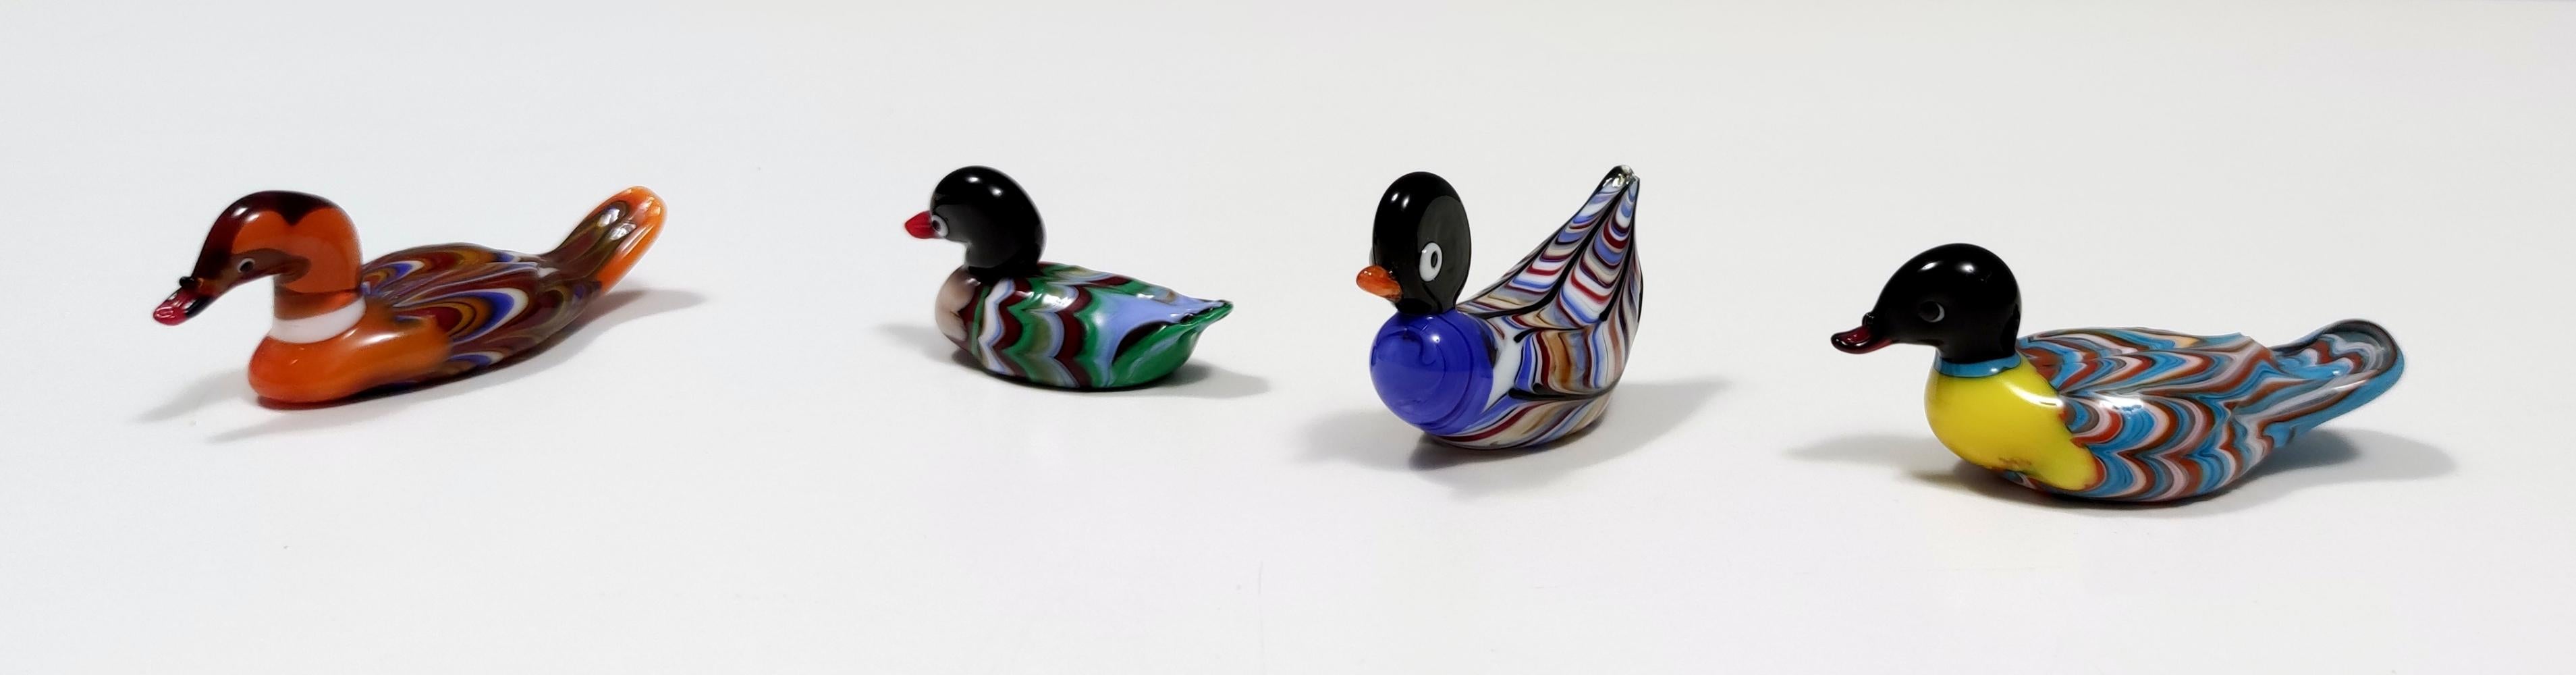 These ducks are made in murano glass.
They are vintage, therefore they might show slight traces of use, but they can be considered as in perfect original condition.

Measures:
Green - 6 x 2.5 H 3 cm 
Orange - 9 x 3 H 3 cm 
Yellow - 9 x 3 H 3